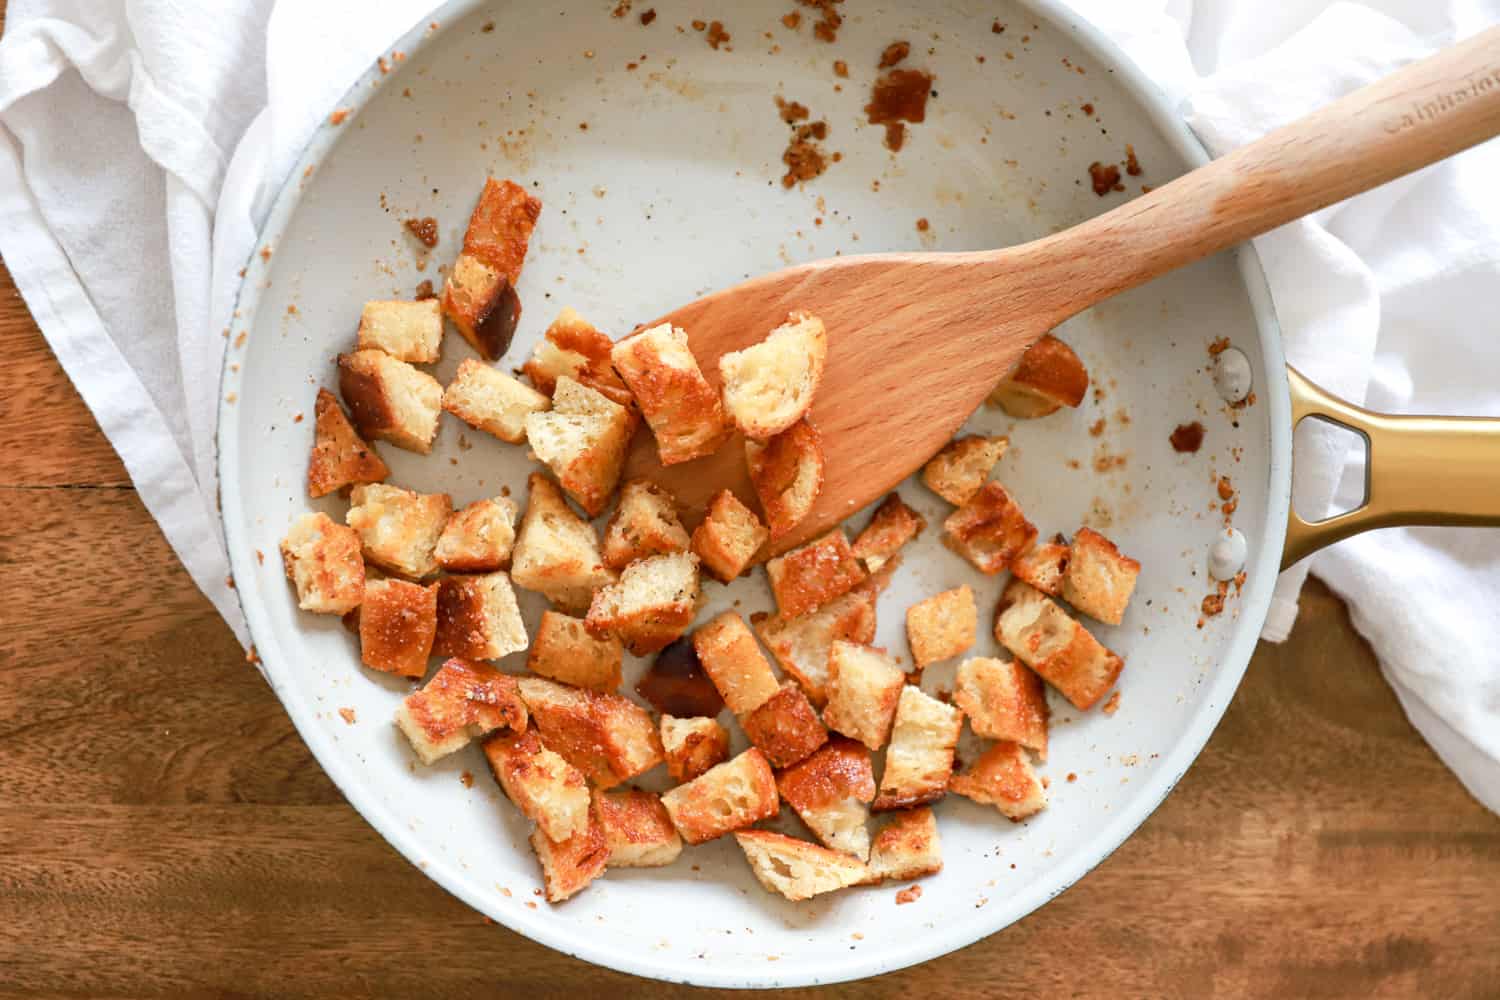 skillet with wooden paddle and croutons on white napkin.